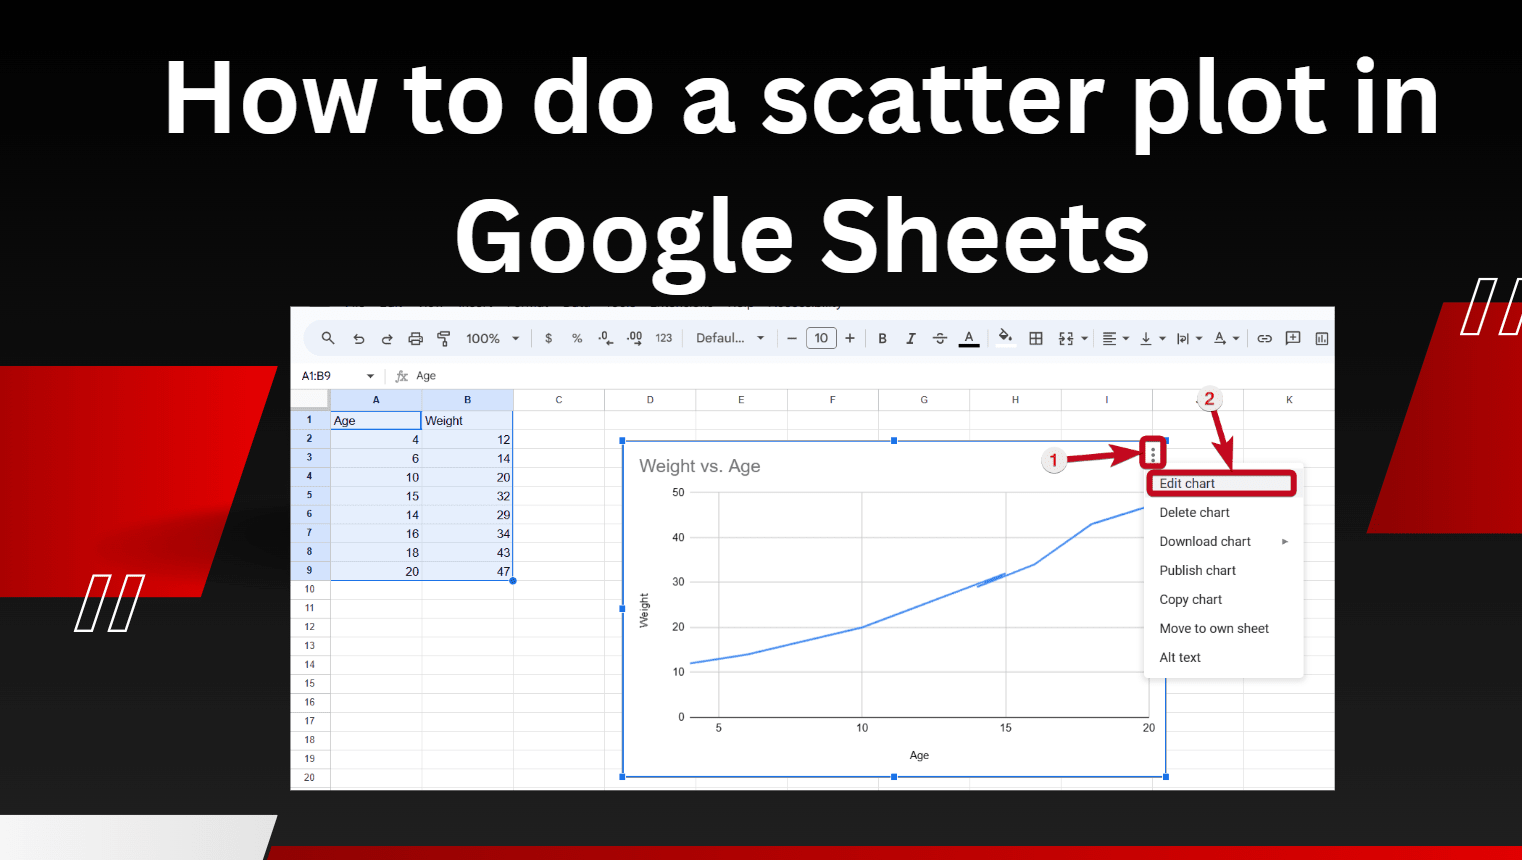 How to do a scatter plot in Google Sheets